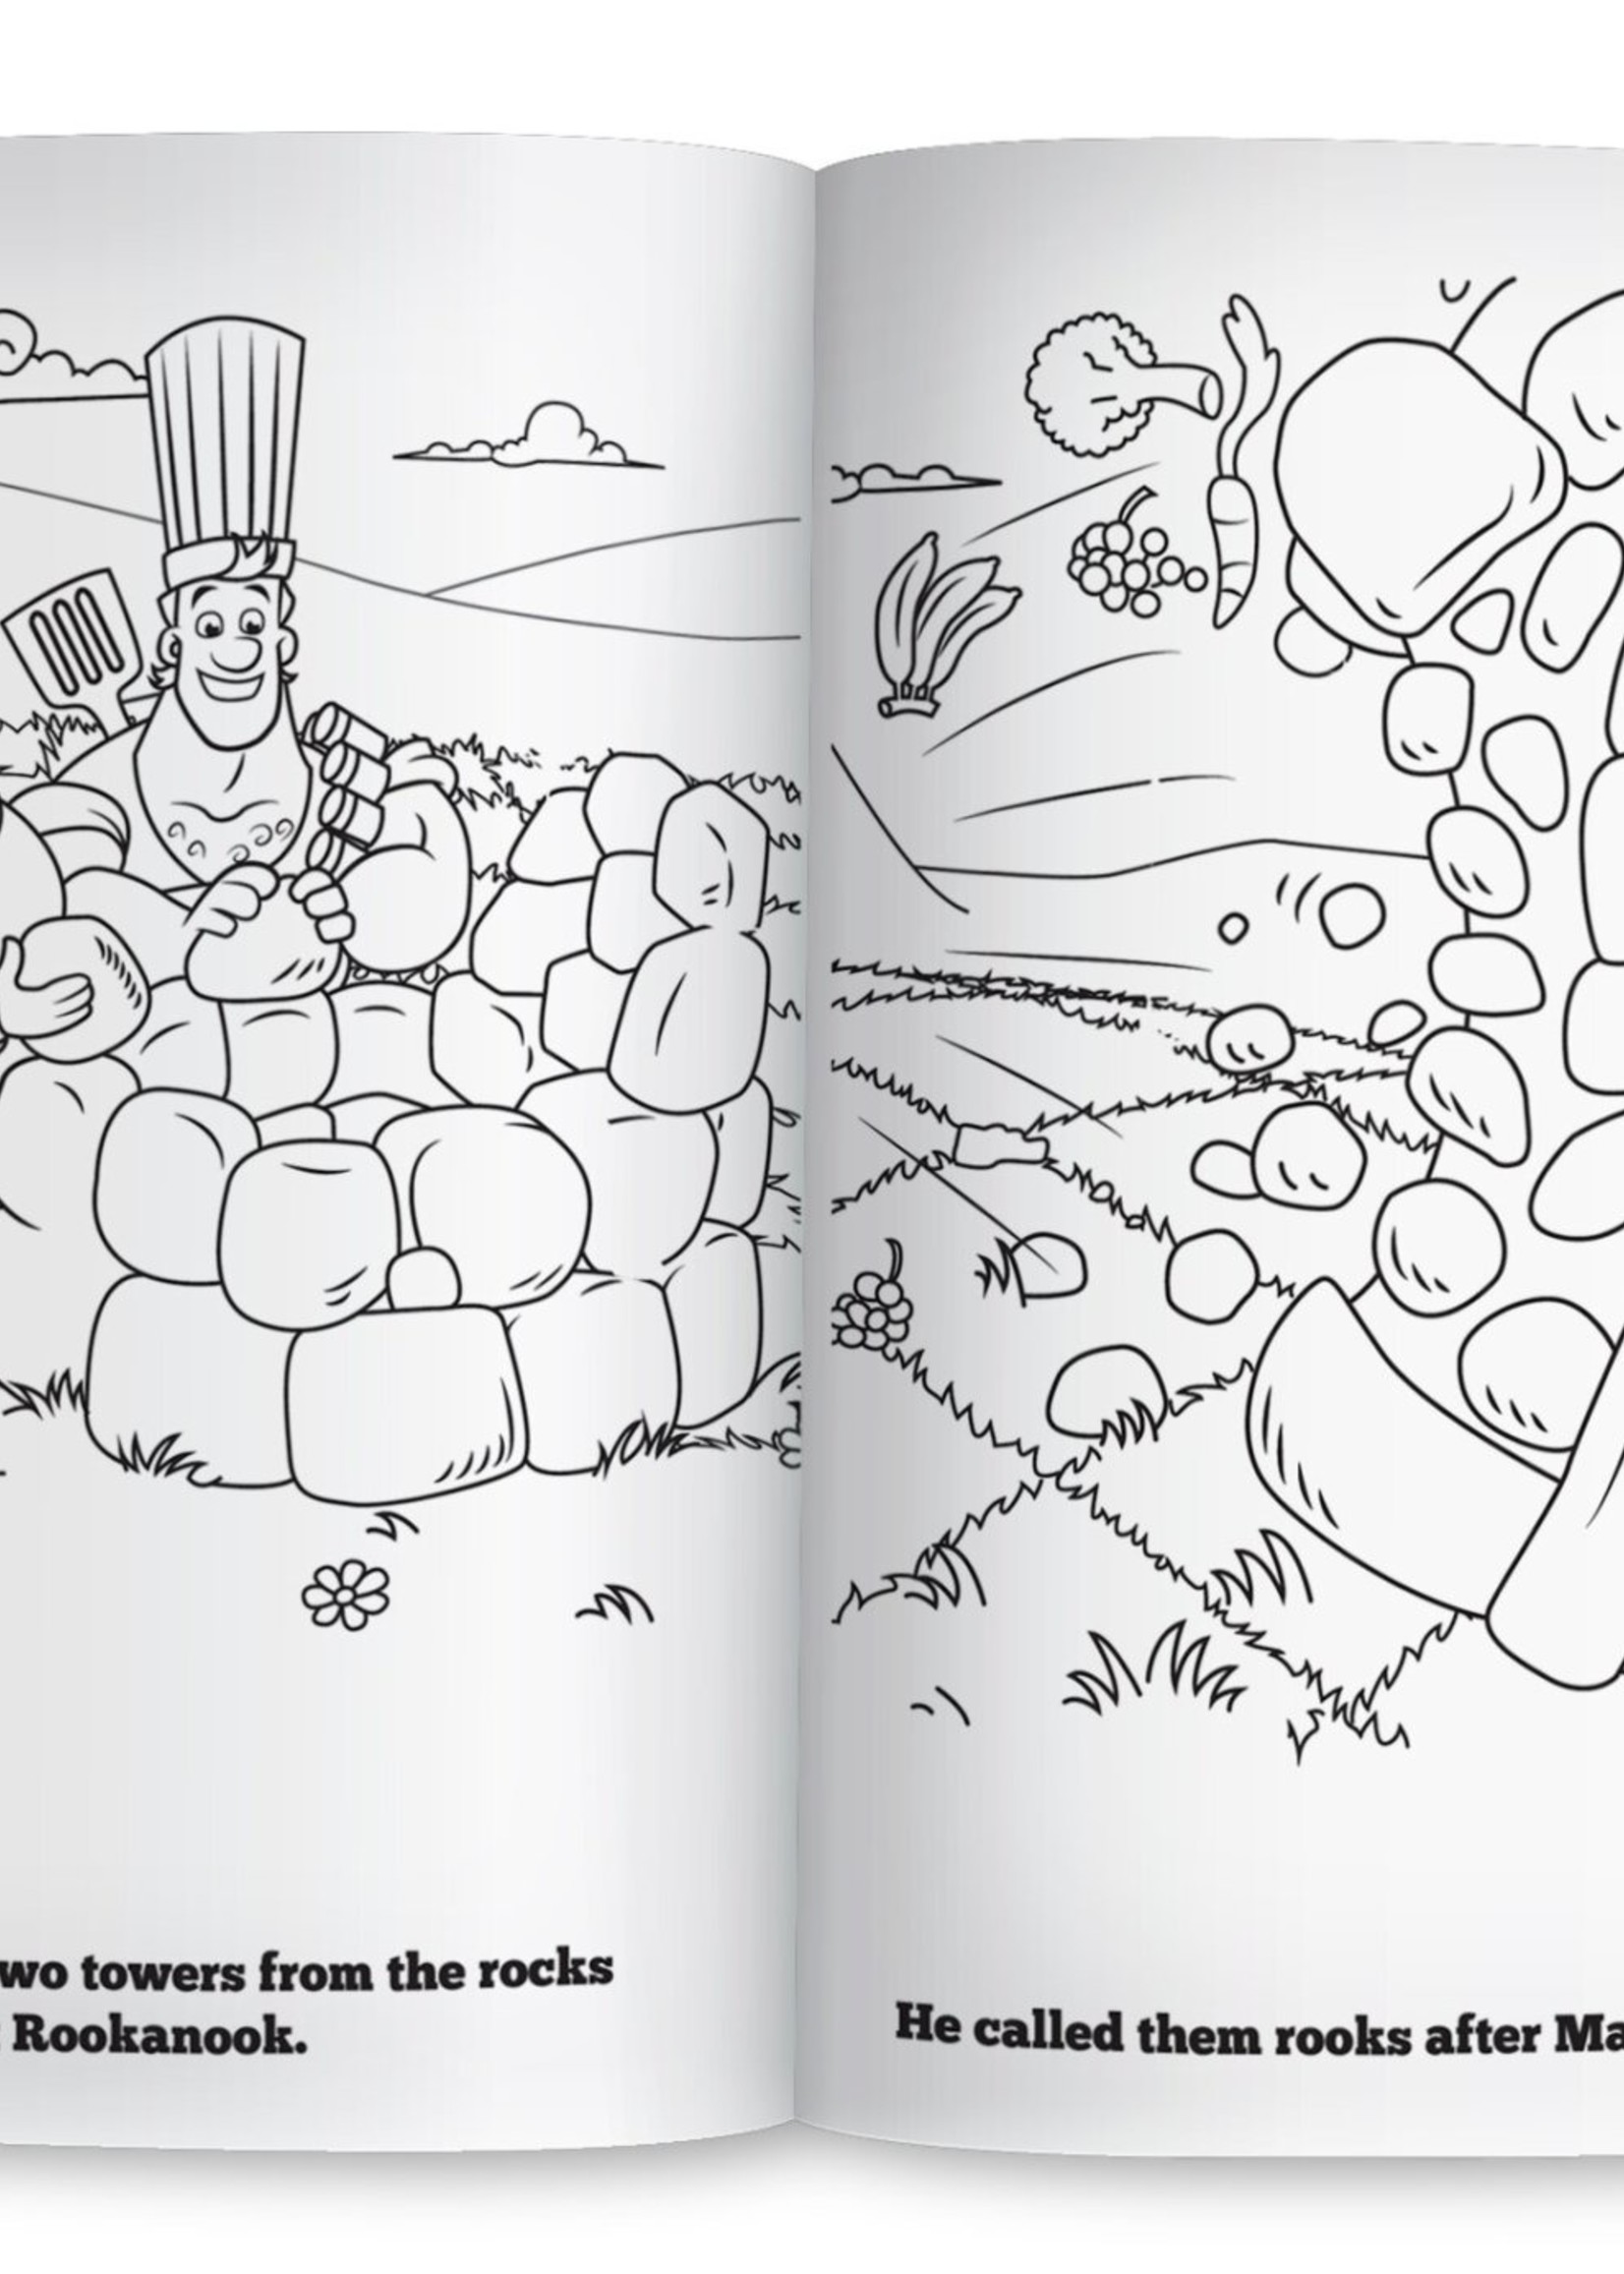 Thinking Cup Games Story Time Chess My Coloring Workbook 1